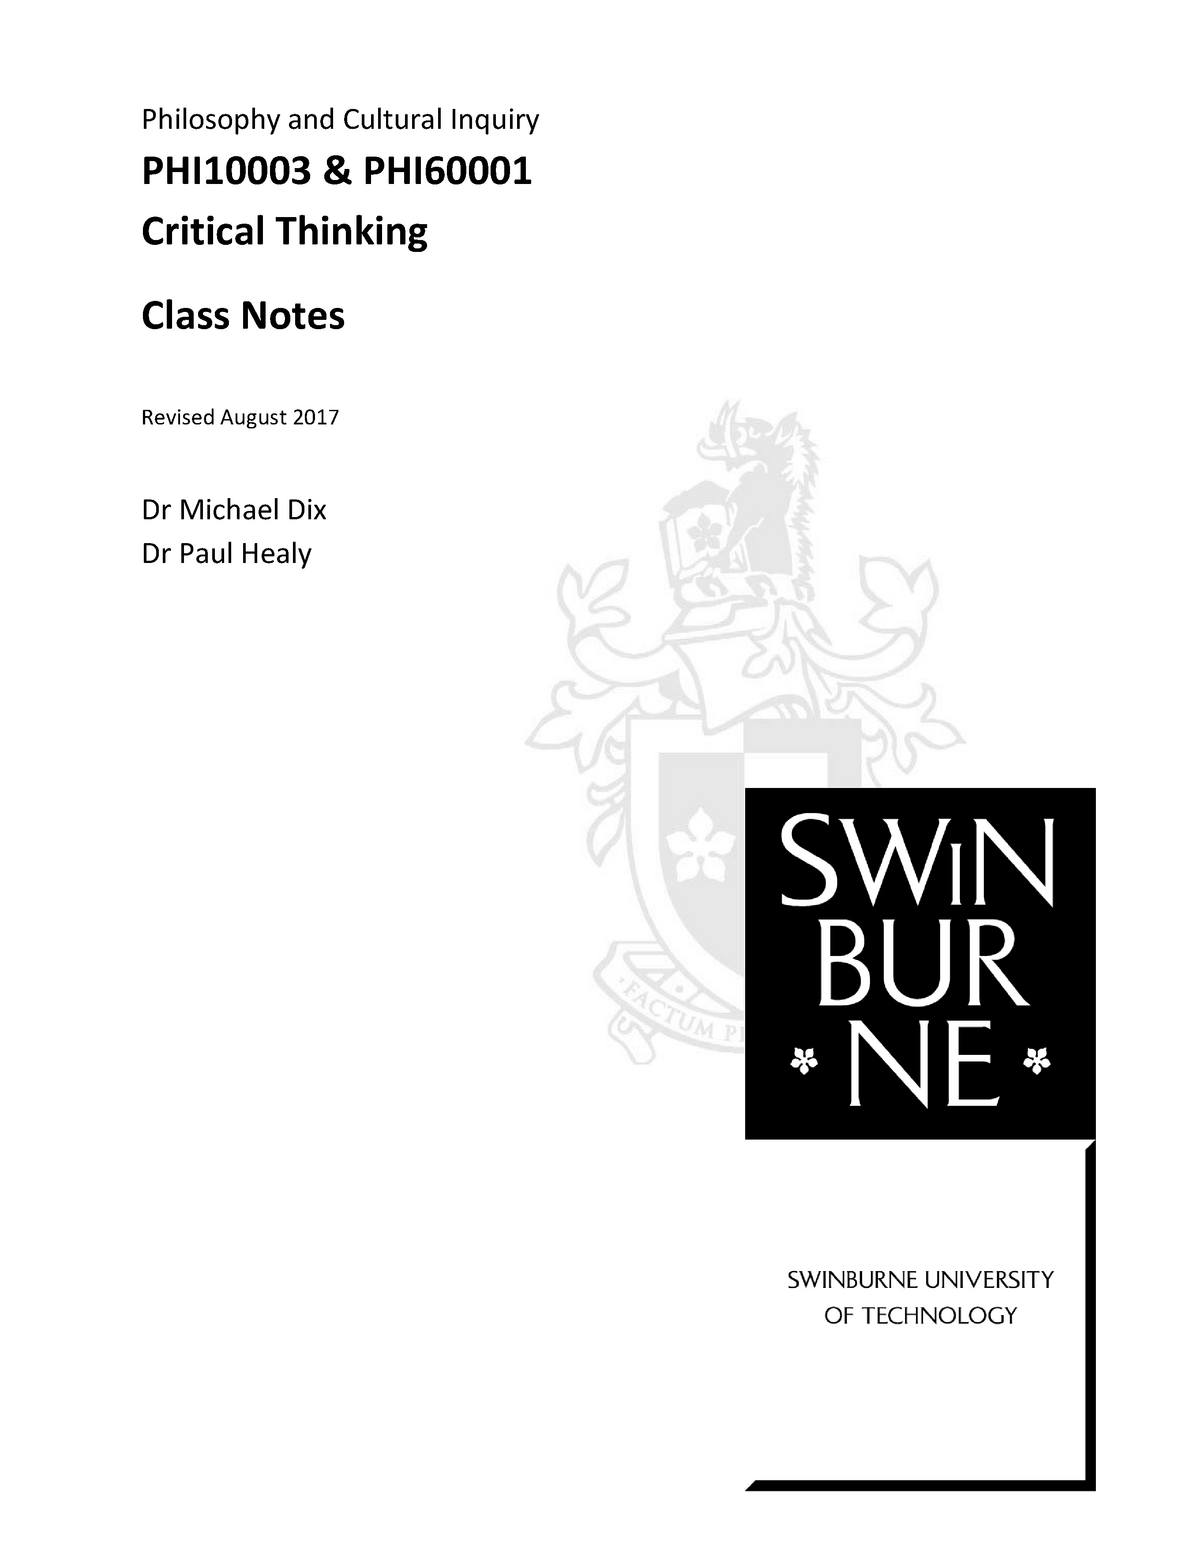 critical thinking knec notes